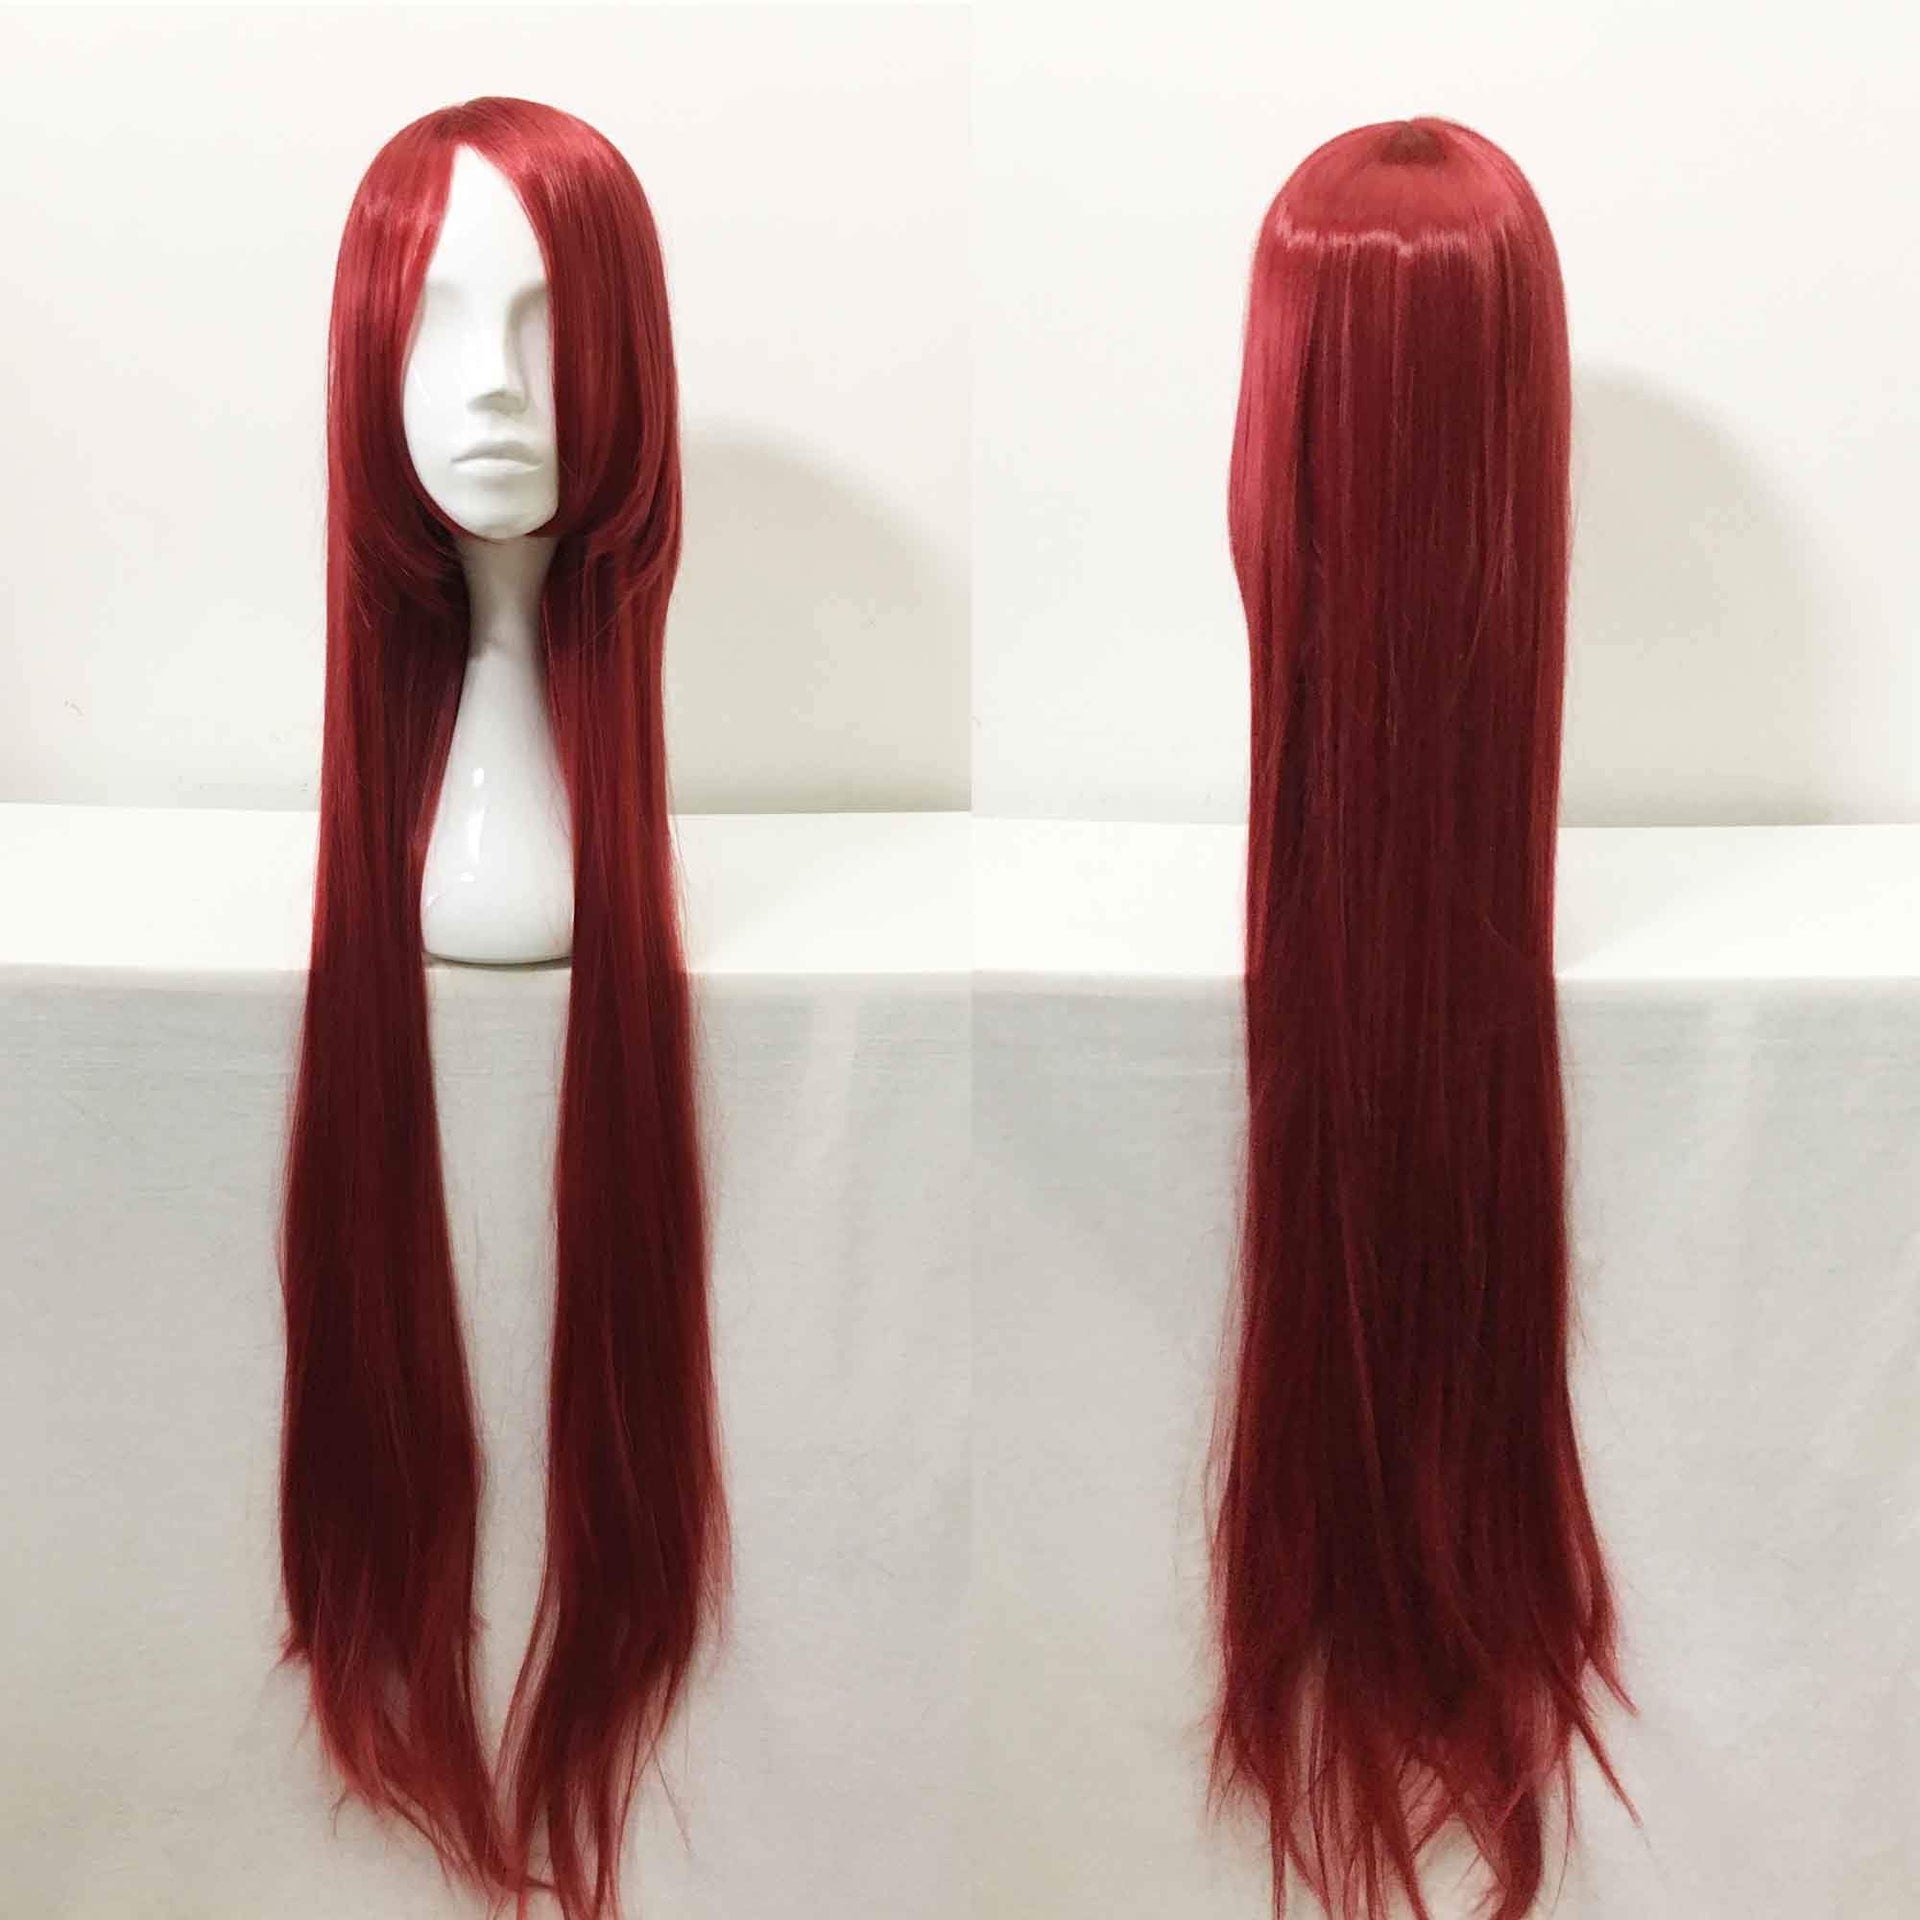 nevermindyrhead Women Red Extra Long Straight Long Bangs Middle Part Cosplay Wig